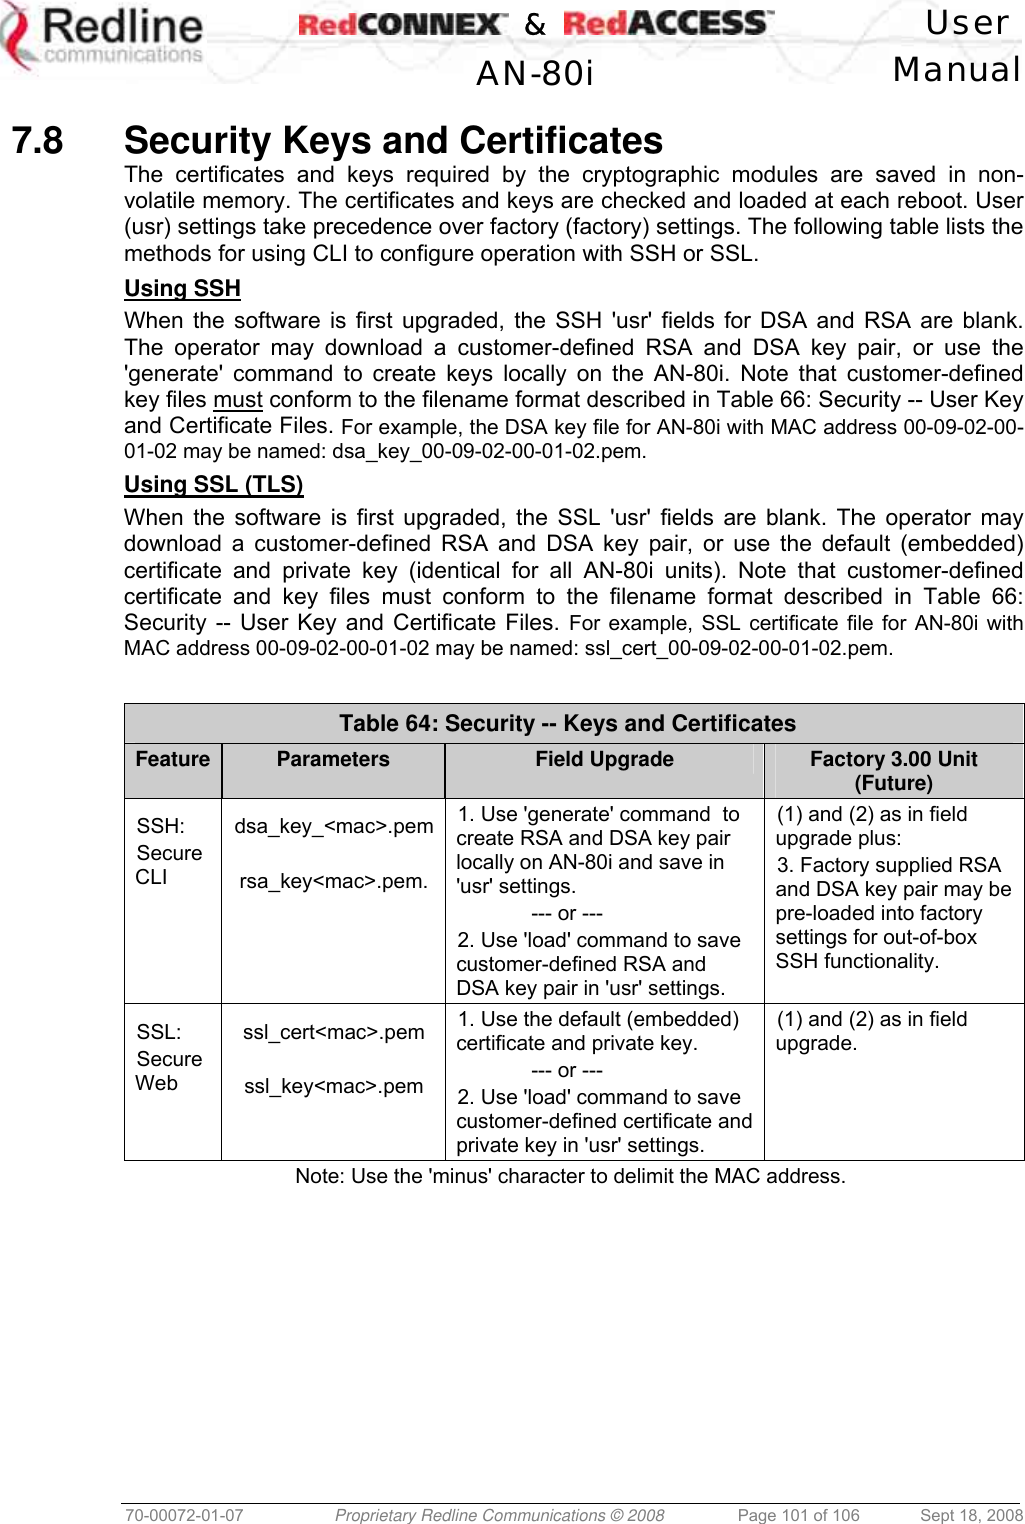    &amp;  User  AN-80i Manual  70-00072-01-07  Proprietary Redline Communications © 2008  Page 101 of 106  Sept 18, 2008  7.8  Security Keys and Certificates The certificates and keys required by the cryptographic modules are saved in non-volatile memory. The certificates and keys are checked and loaded at each reboot. User (usr) settings take precedence over factory (factory) settings. The following table lists the methods for using CLI to configure operation with SSH or SSL. Using SSH When the software is first upgraded, the SSH &apos;usr&apos; fields for DSA and RSA are blank. The operator may download a customer-defined RSA and DSA key pair, or use the &apos;generate&apos; command to create keys locally on the AN-80i. Note that customer-defined key files must conform to the filename format described in Table 66: Security -- User Key and Certificate Files. For example, the DSA key file for AN-80i with MAC address 00-09-02-00-01-02 may be named: dsa_key_00-09-02-00-01-02.pem. Using SSL (TLS) When the software is first upgraded, the SSL &apos;usr&apos; fields are blank. The operator may download a customer-defined RSA and DSA key pair, or use the default (embedded) certificate and private key (identical for all AN-80i units). Note that customer-defined certificate and key files must conform to the filename format described in Table 66: Security -- User Key and Certificate Files. For example, SSL certificate file for AN-80i with MAC address 00-09-02-00-01-02 may be named: ssl_cert_00-09-02-00-01-02.pem.  Table 64: Security -- Keys and Certificates Feature  Parameters  Field Upgrade  Factory 3.00 Unit (Future)  SSH:  Secure CLI  dsa_key_&lt;mac&gt;.pem rsa_key&lt;mac&gt;.pem. 1. Use &apos;generate&apos; command  to create RSA and DSA key pair locally on AN-80i and save in &apos;usr&apos; settings.   --- or --- 2. Use &apos;load&apos; command to save customer-defined RSA and DSA key pair in &apos;usr&apos; settings. (1) and (2) as in field upgrade plus: 3. Factory supplied RSA and DSA key pair may be pre-loaded into factory settings for out-of-box SSH functionality.  SSL:  Secure Web  ssl_cert&lt;mac&gt;.pem  ssl_key&lt;mac&gt;.pem 1. Use the default (embedded) certificate and private key.   --- or --- 2. Use &apos;load&apos; command to save customer-defined certificate and private key in &apos;usr&apos; settings. (1) and (2) as in field upgrade. Note: Use the &apos;minus&apos; character to delimit the MAC address. 